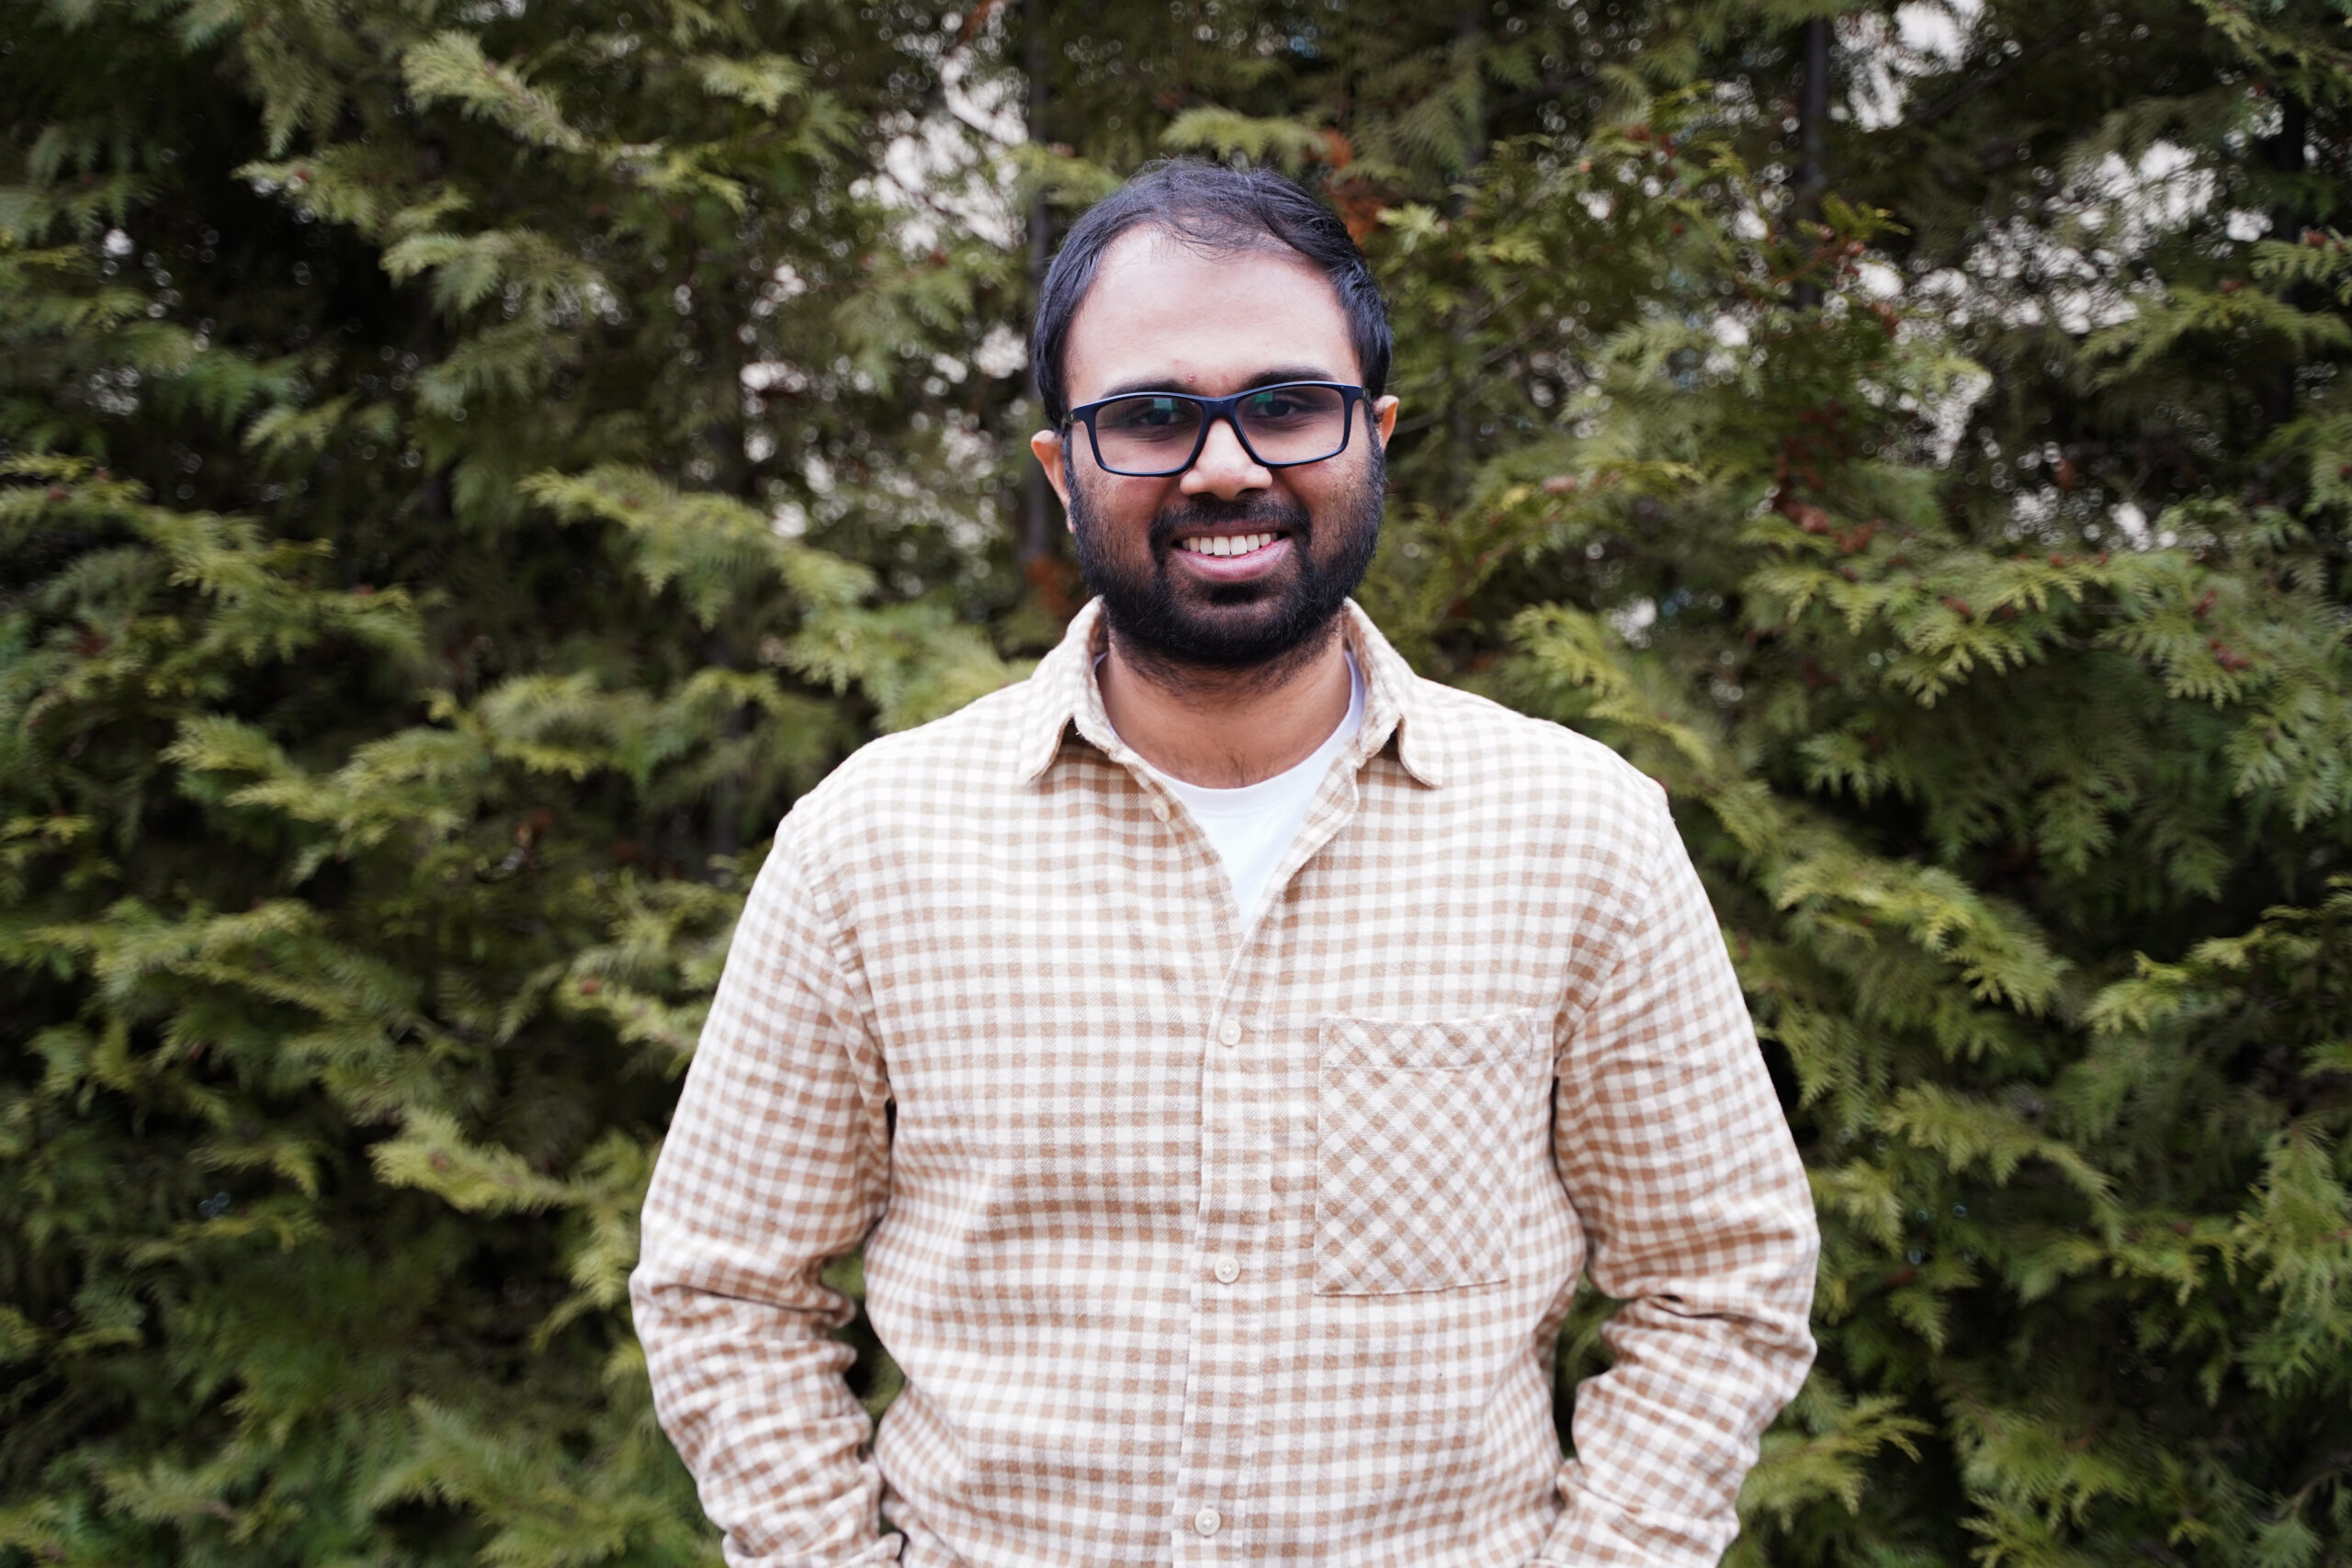 We welcome Ganesh as Ortivus’ new Software Developer!